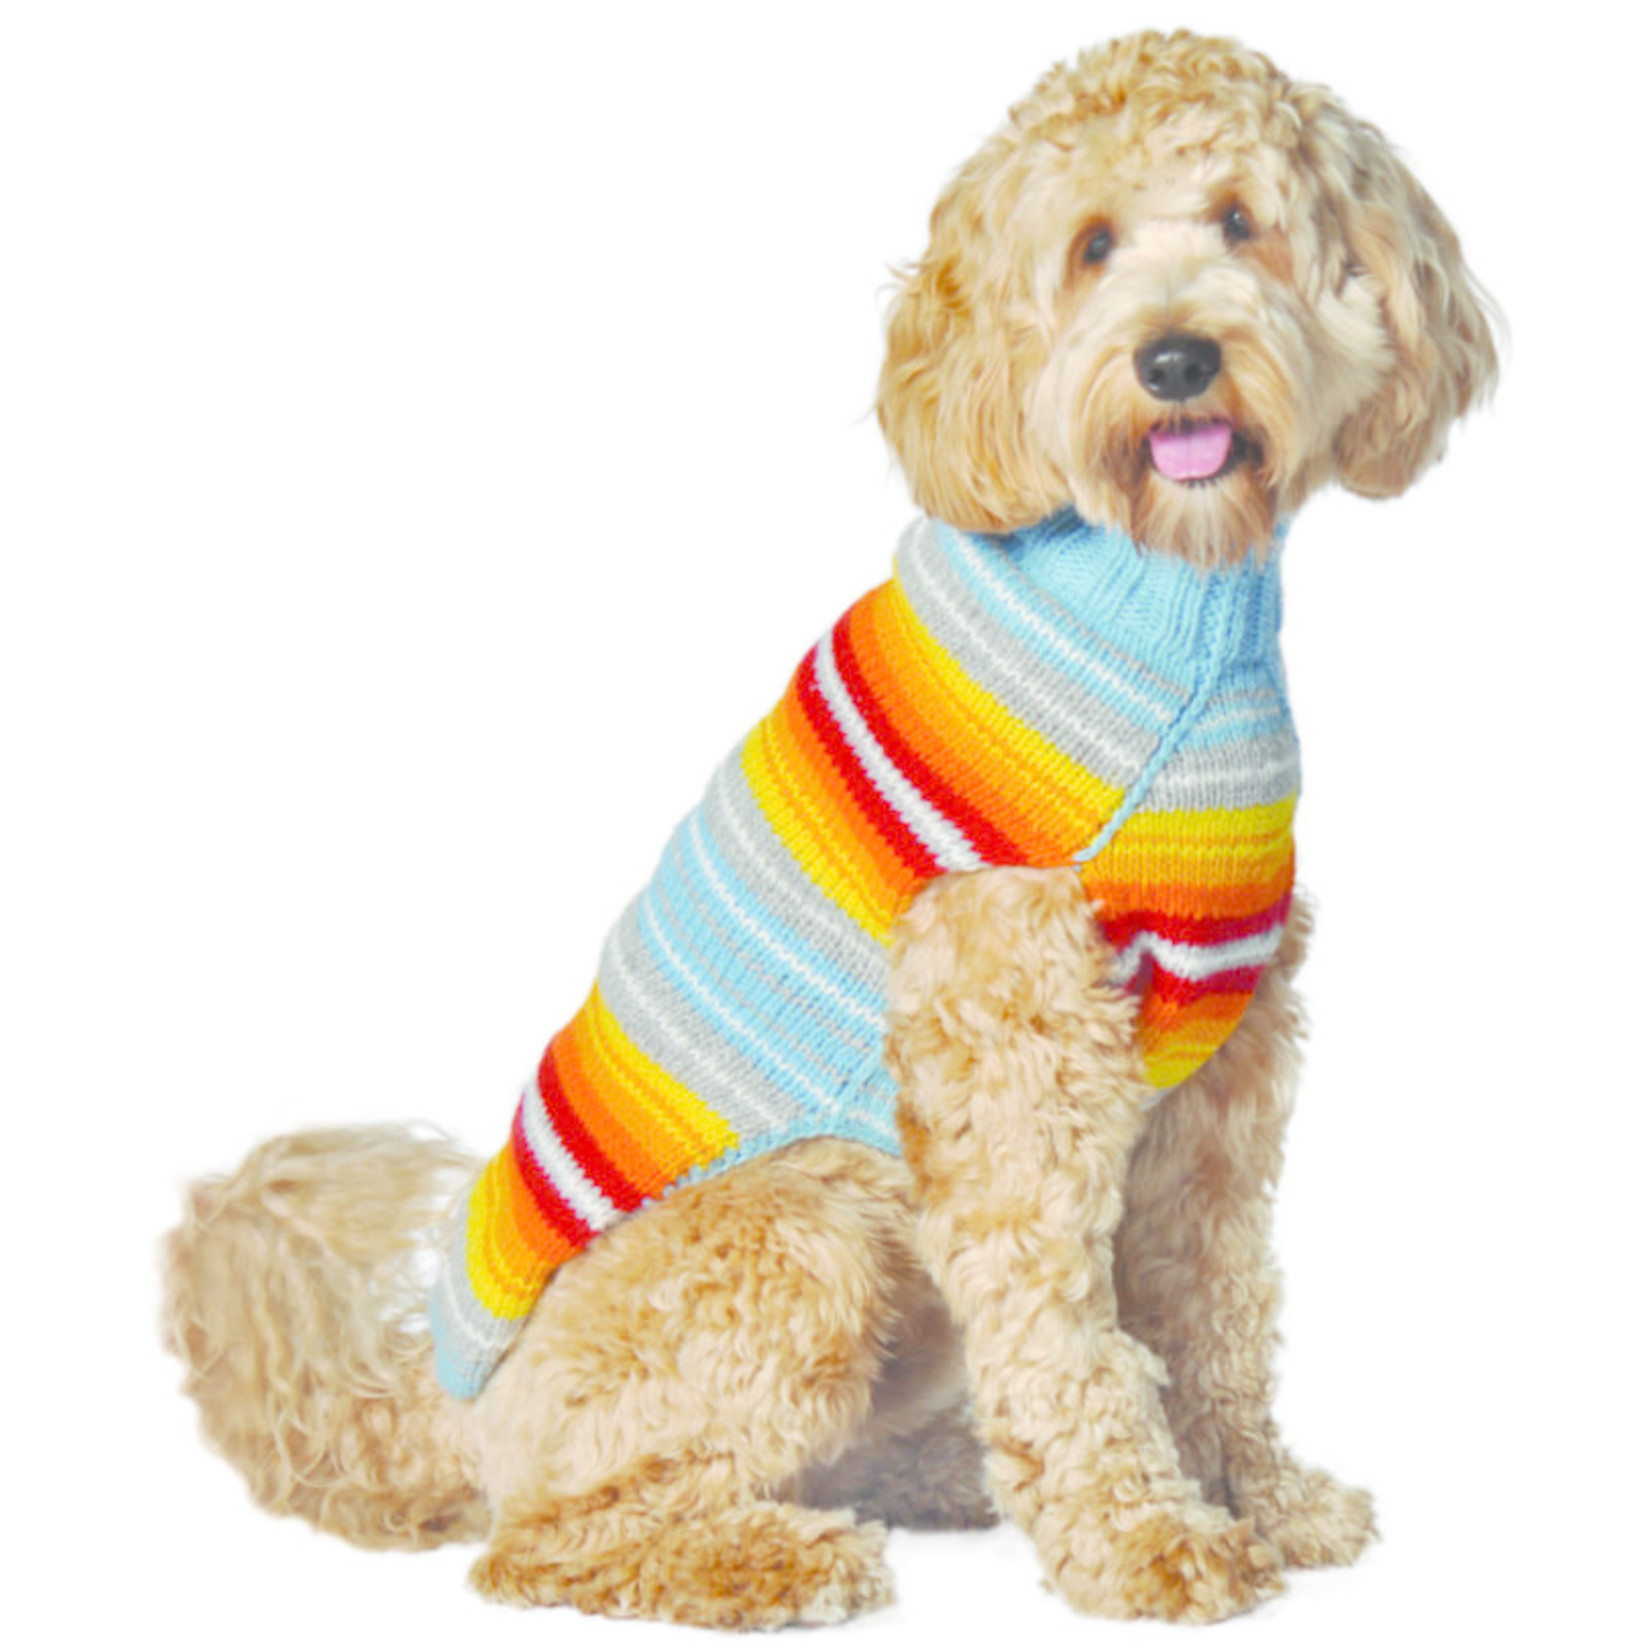 Chilly Dog Chilly Dog Turquoise Serape Hand Knit Fair Trade Dog Wool Sweater